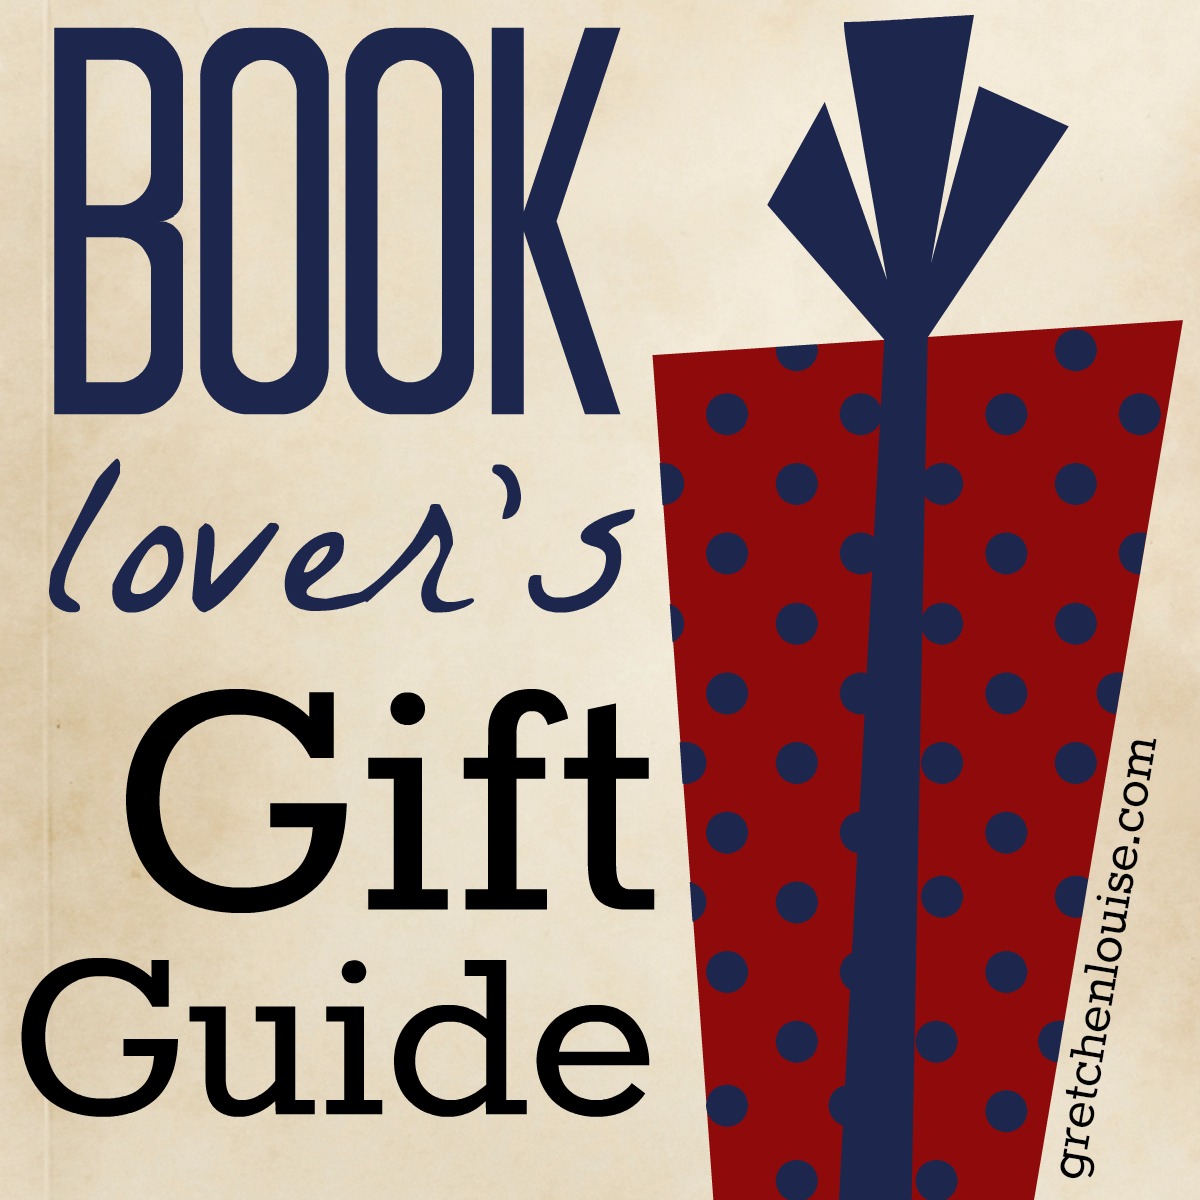 a book lover’s gift guide